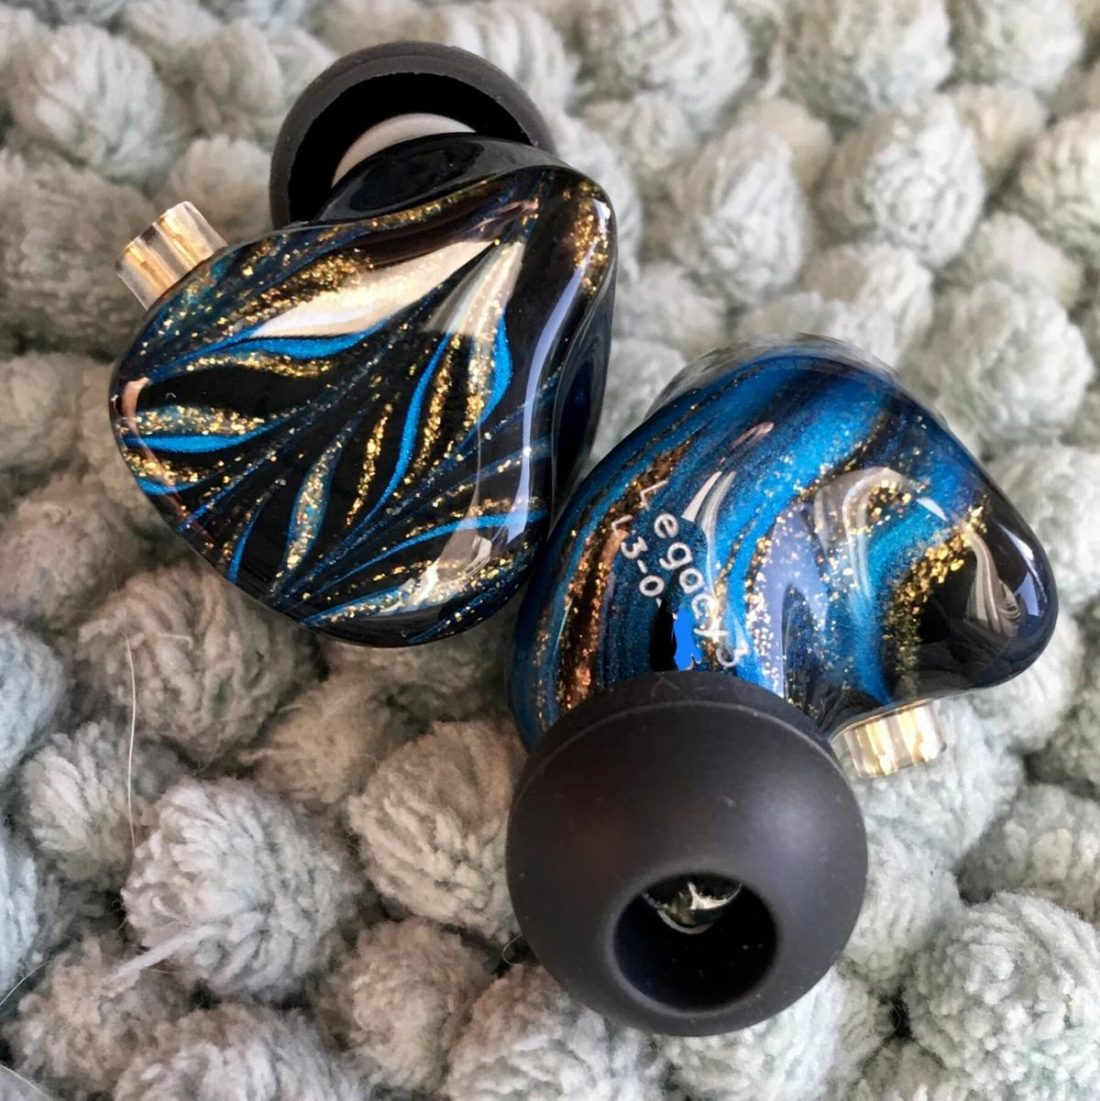 The Legacy 3 in Mystique shells. (From Head-fi.org)